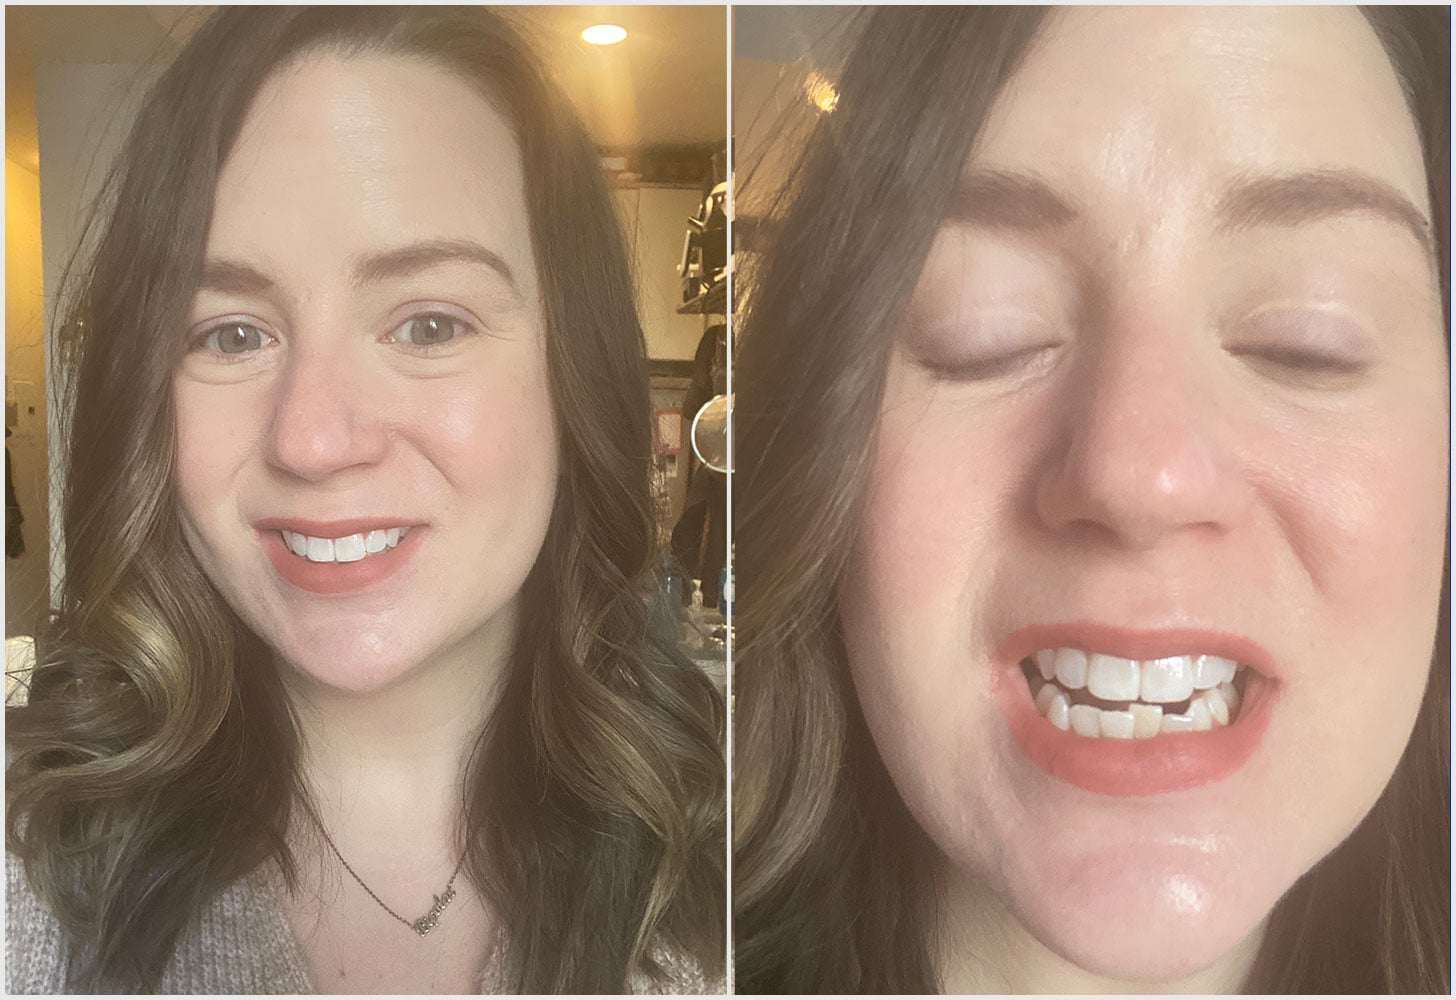 Smile Direct Club Teeth Aligners Review and Photos | POPSUGAR Beauty